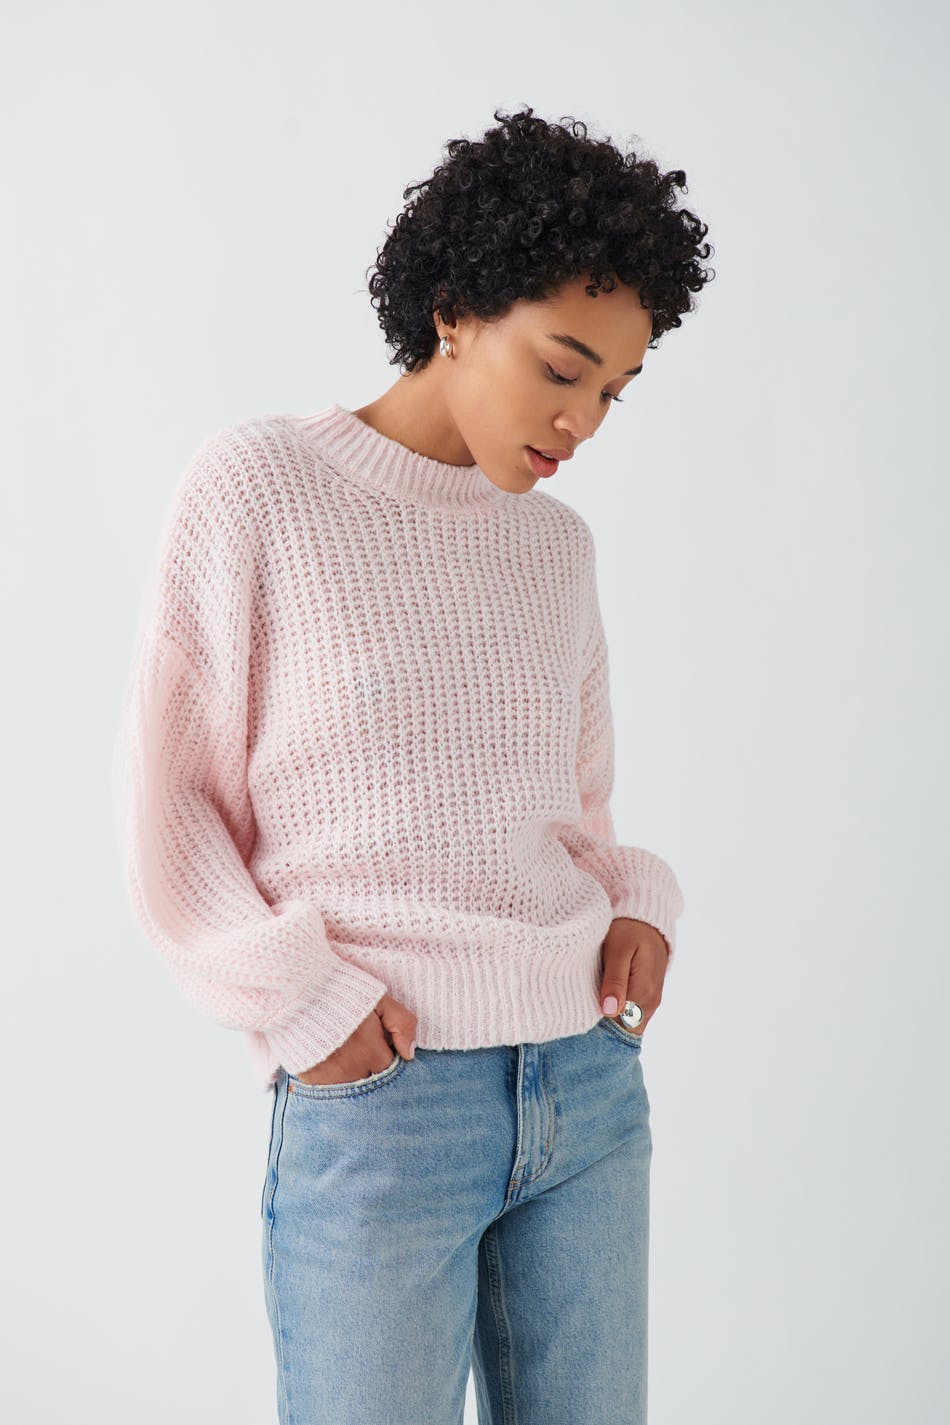 Gina Tricot - Chunky knitted sweater - stickade tröjor - Pink - S - Female